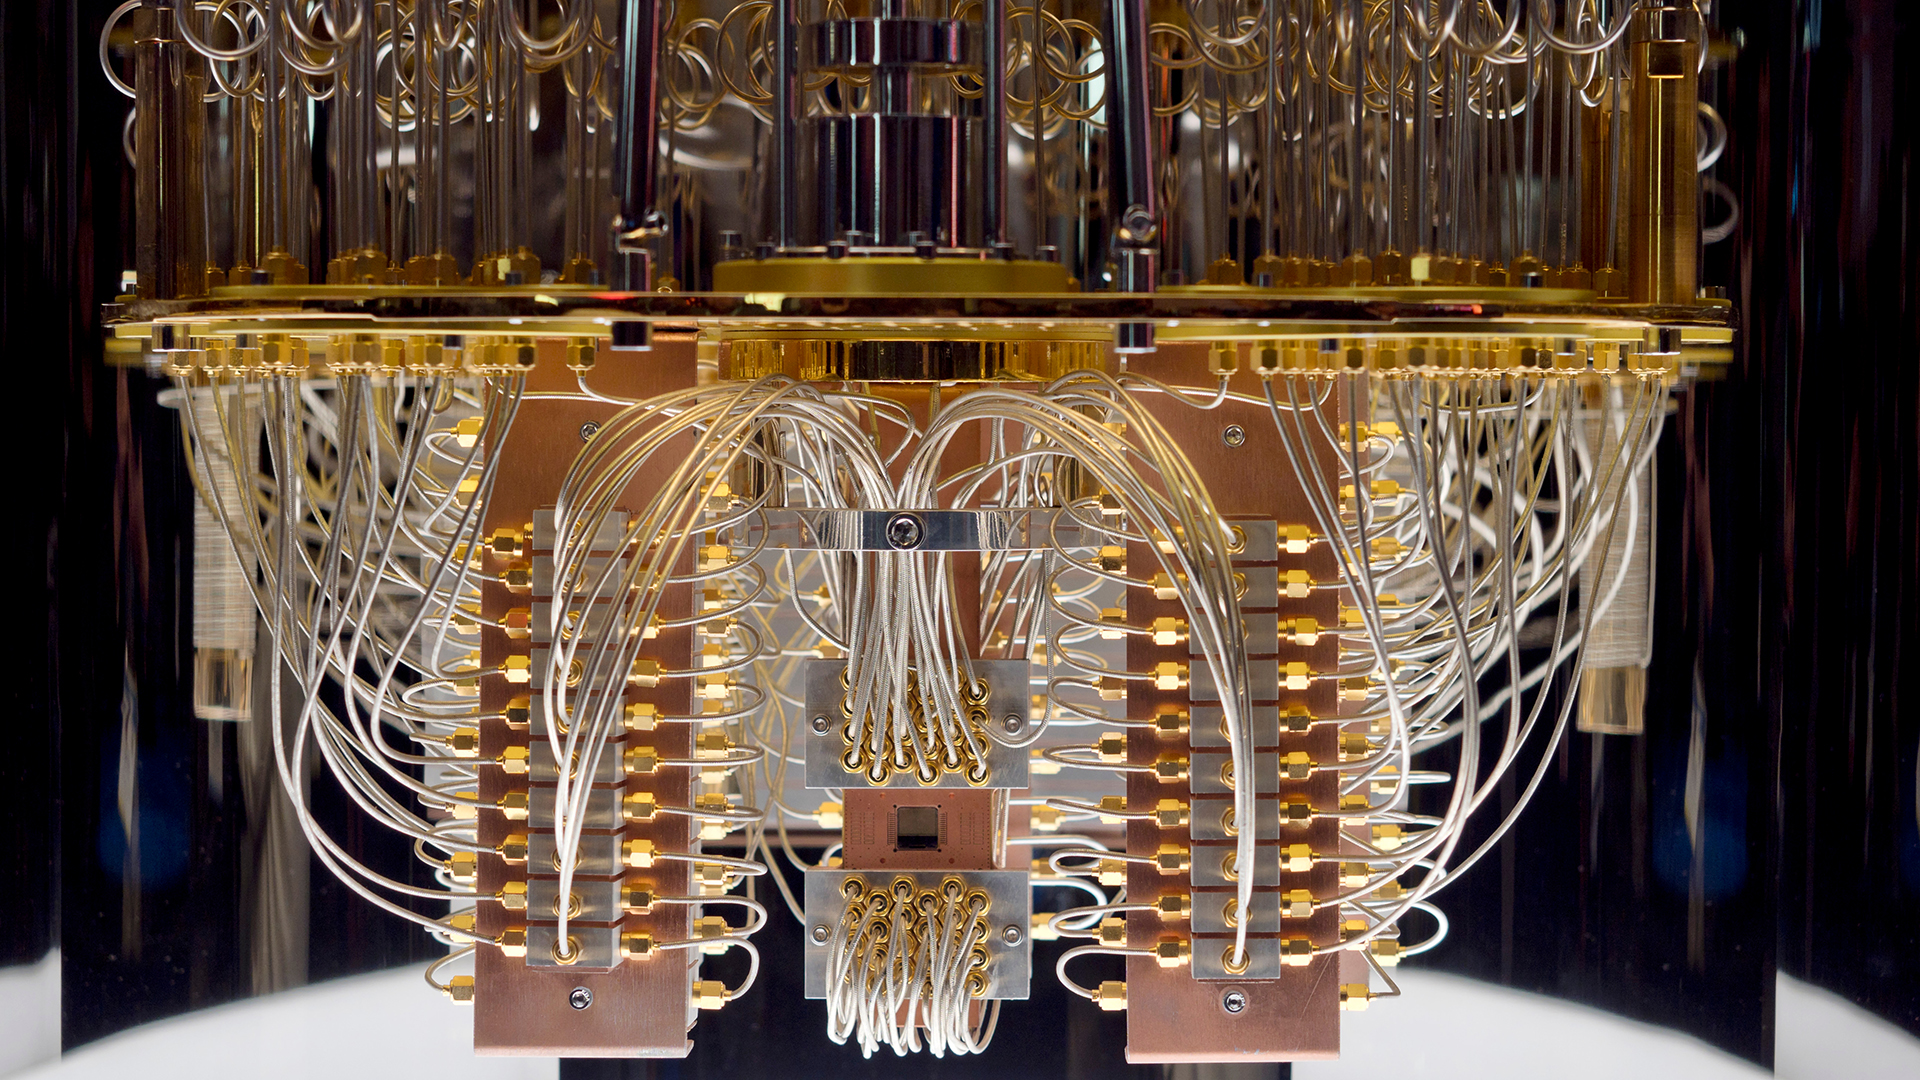 New technology will develop scalable, affordable quantum computers